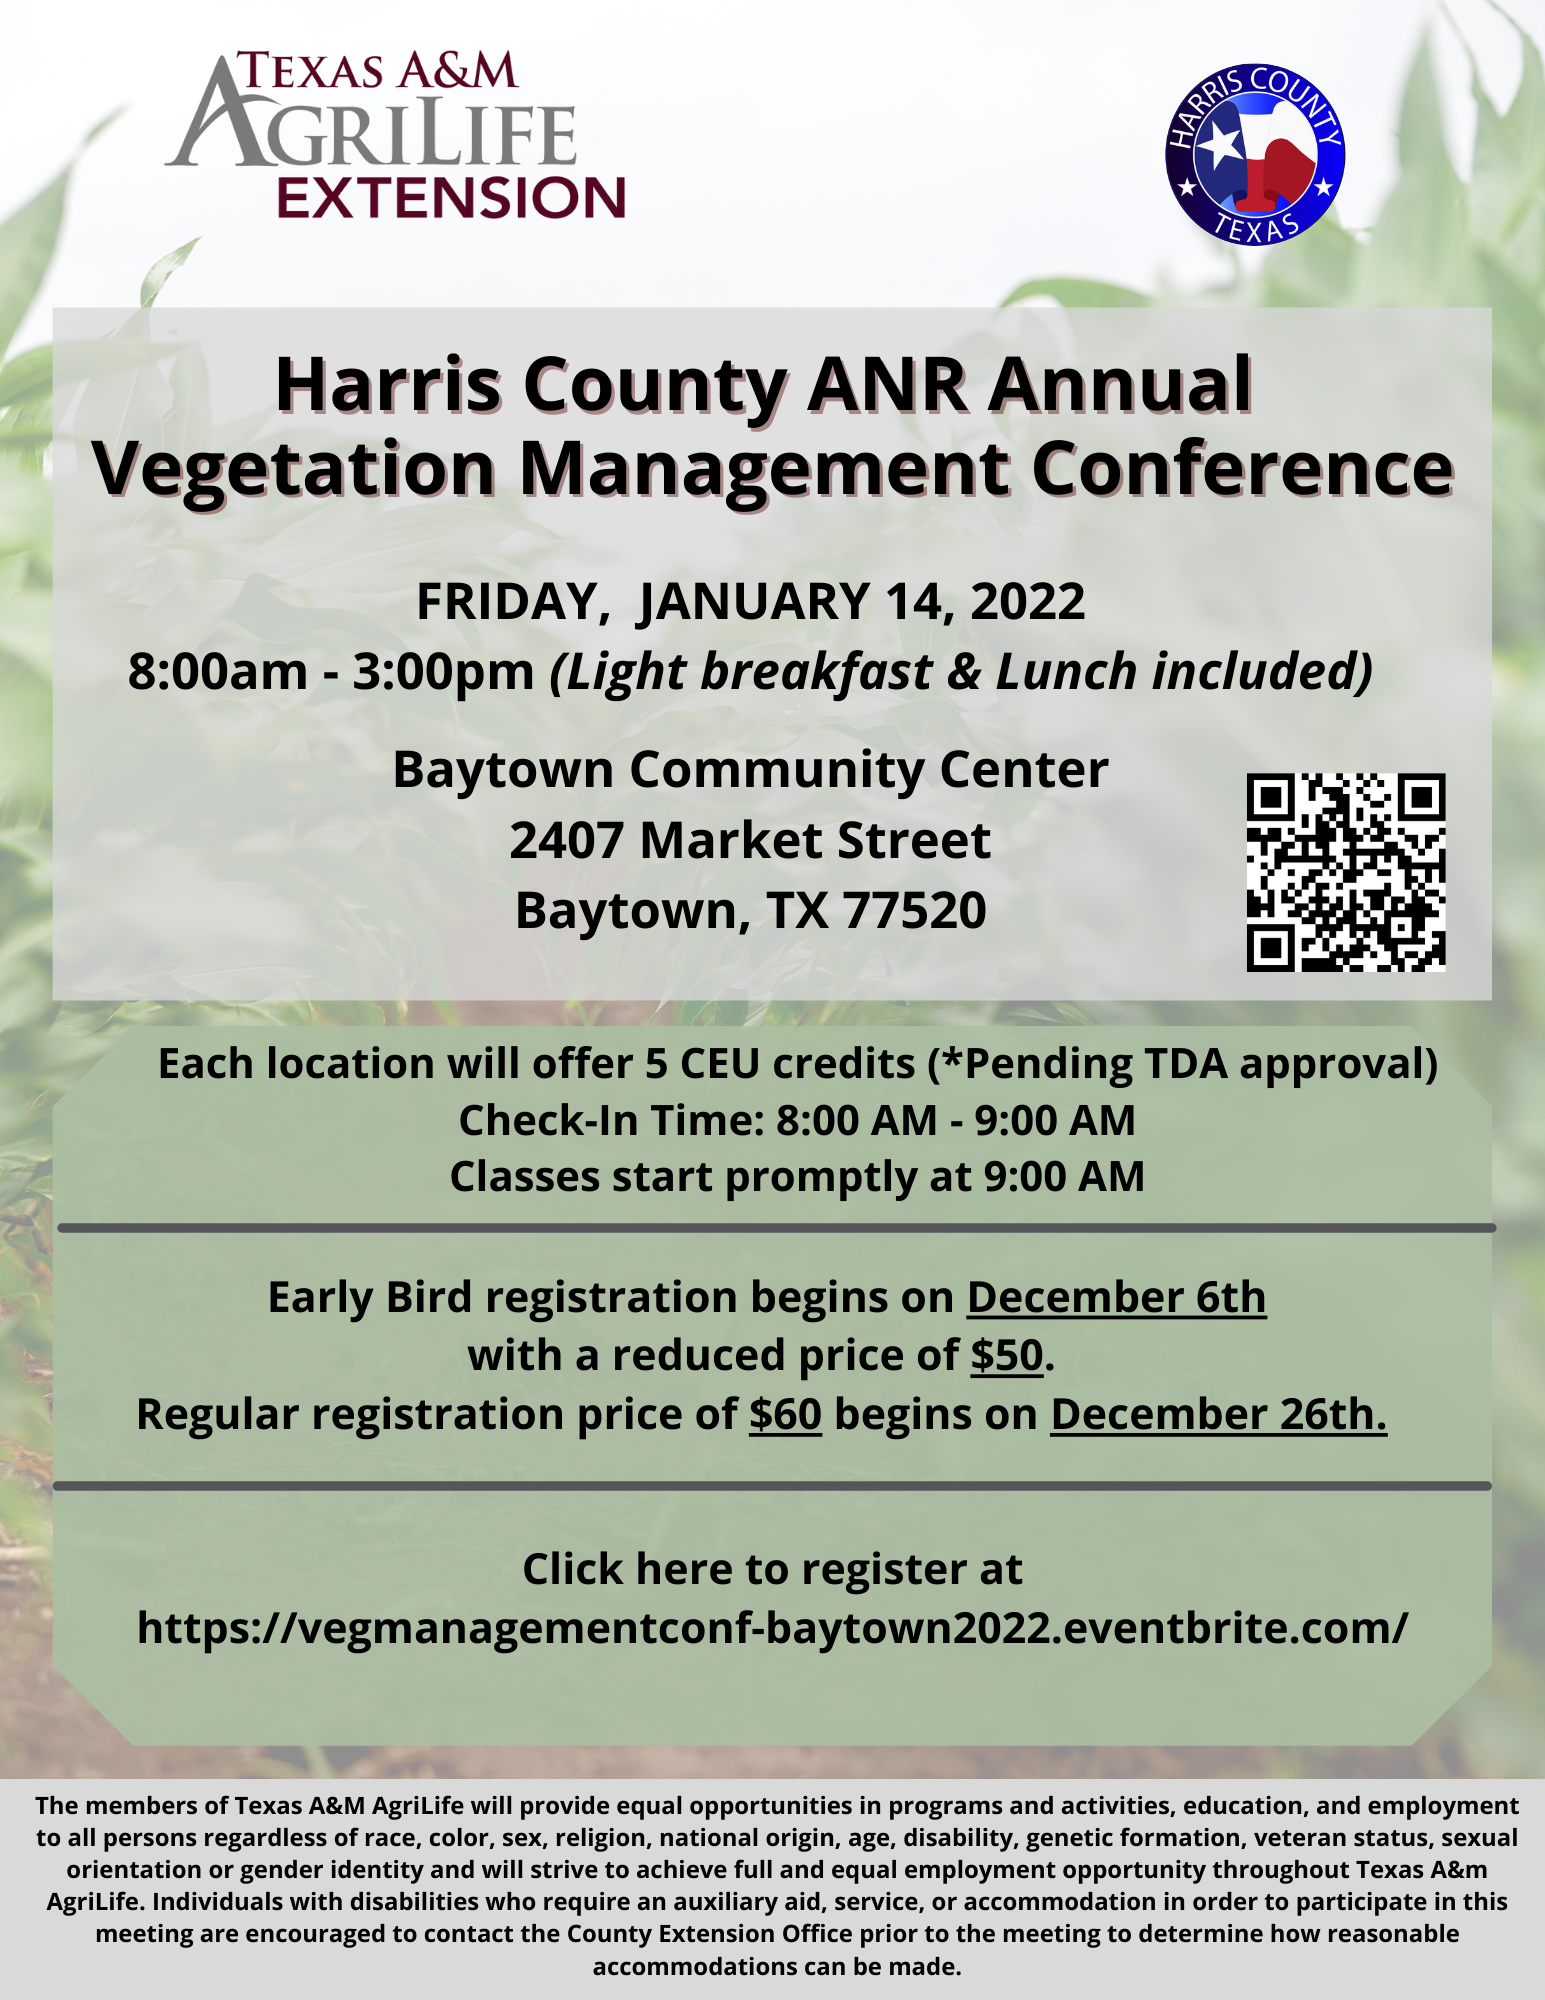 Harris County ANR Annual Vegetation Management Conference Baytown